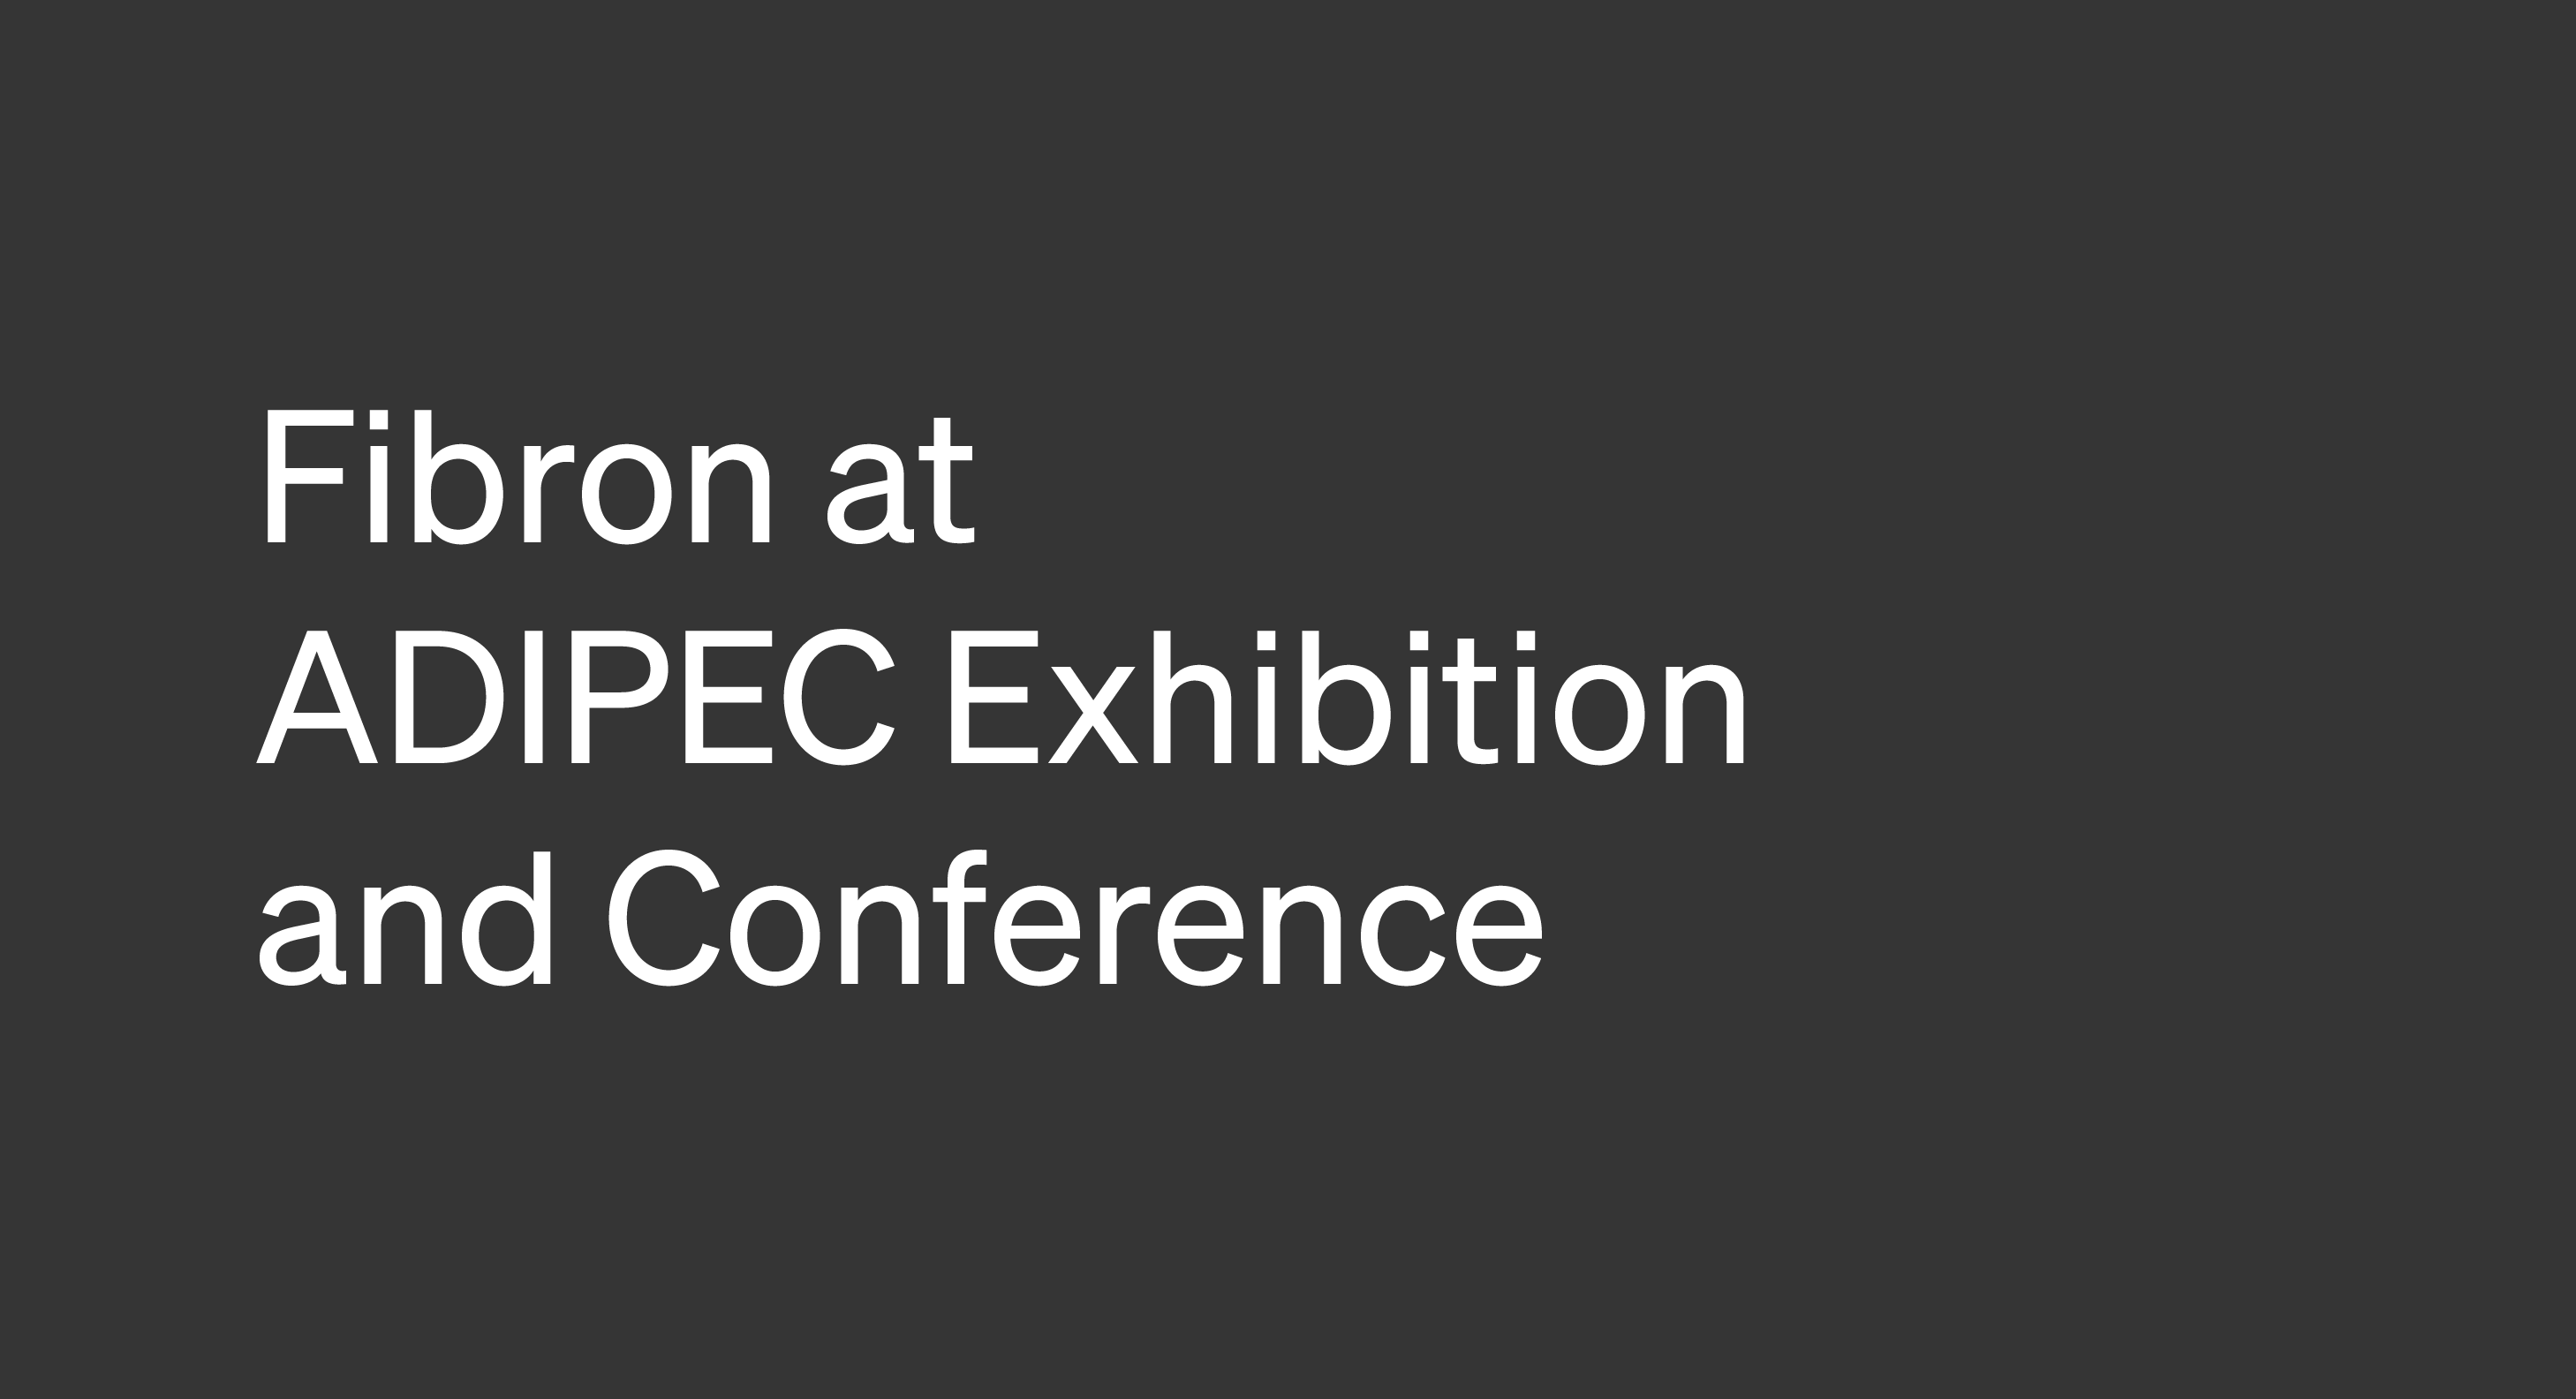 ADIPEC Exhibition and Conference 